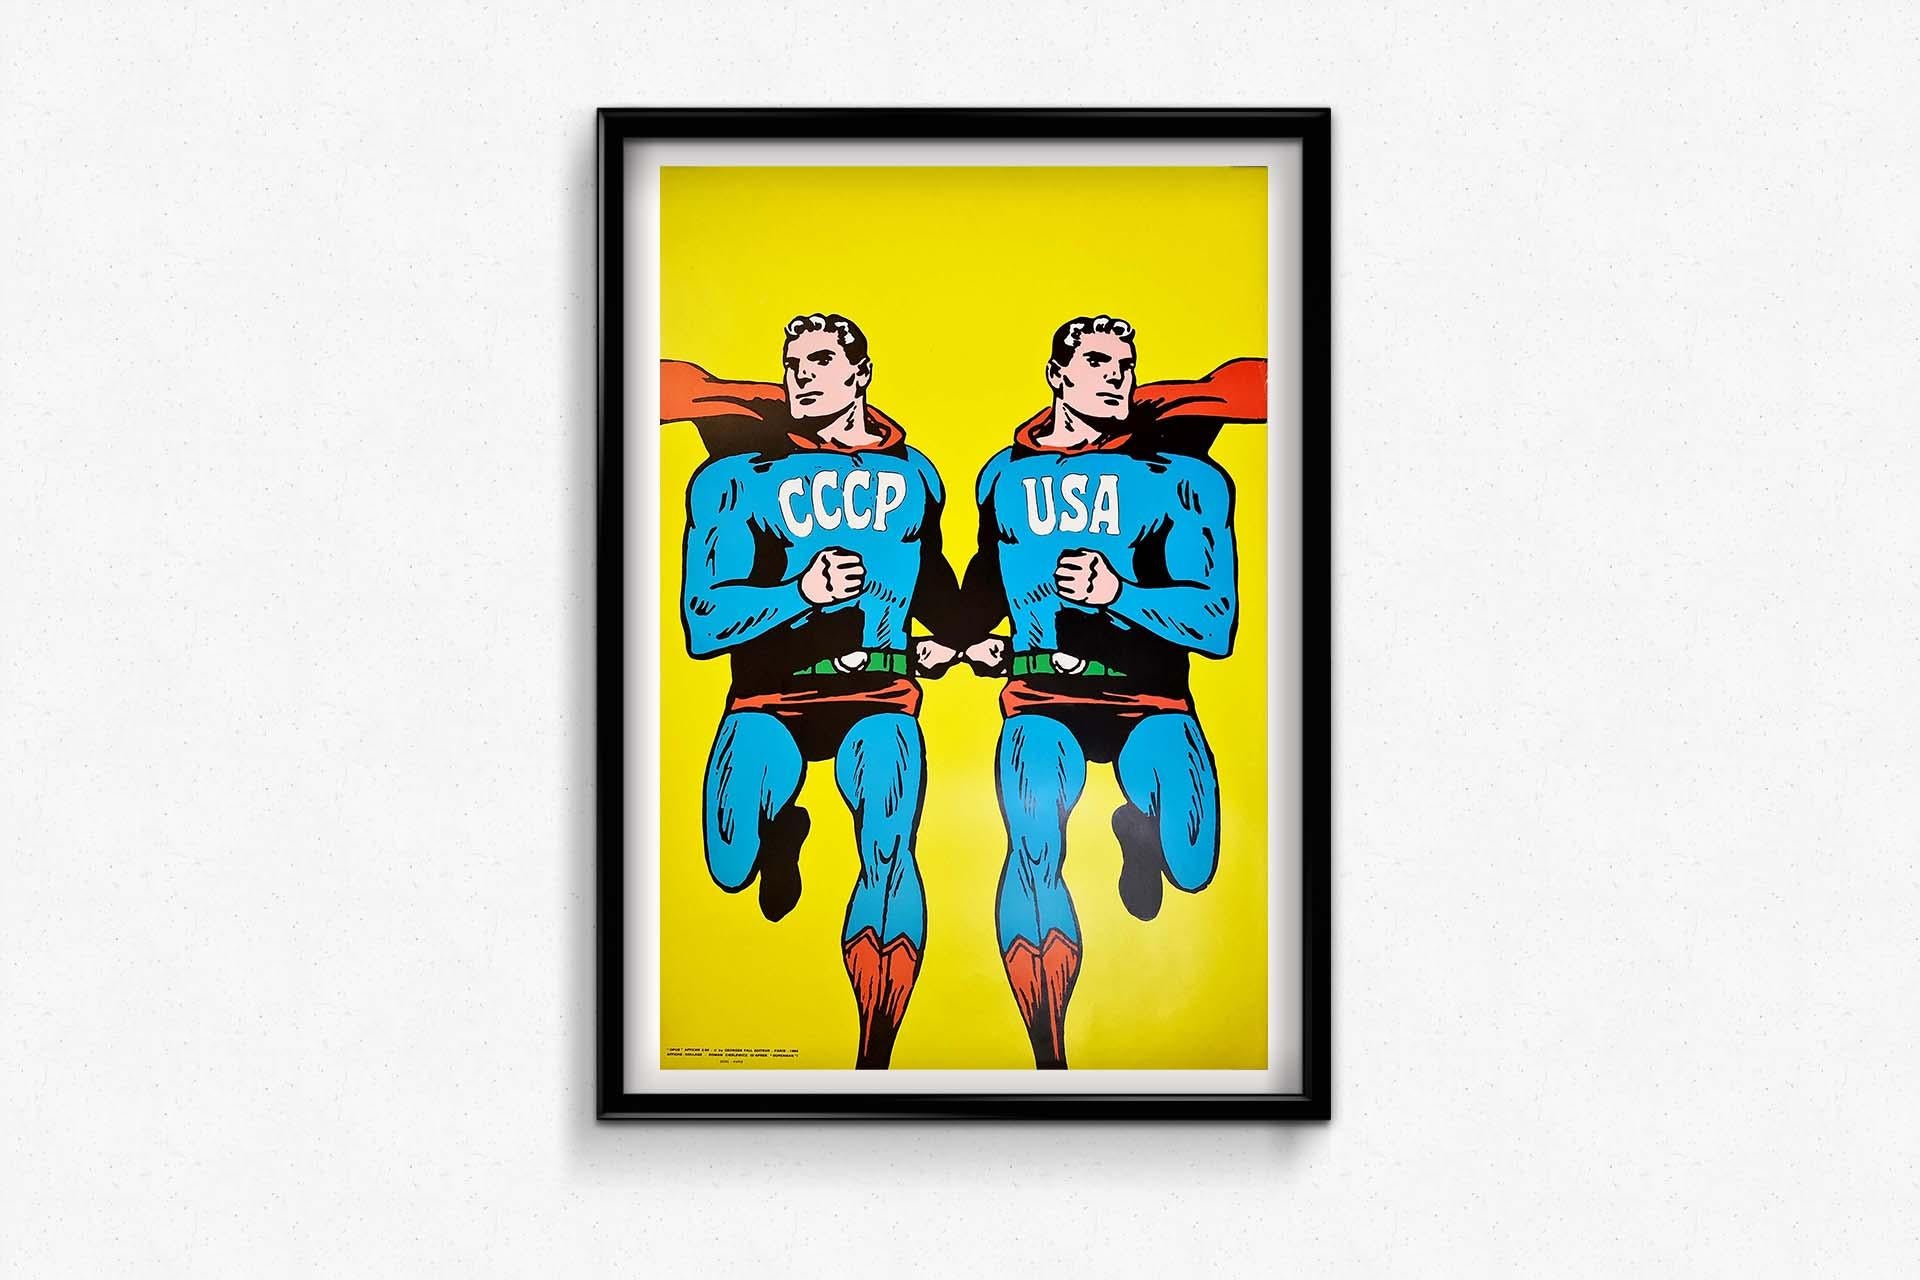 Original poster Superman CCCP - USA

Created by the editor Georges Fall, Opus International is a French contemporary art magazine founded in 1967 and disappeared in 1995.
From the beginning, it is Roman Cieslewicz who ensures the graphic design and